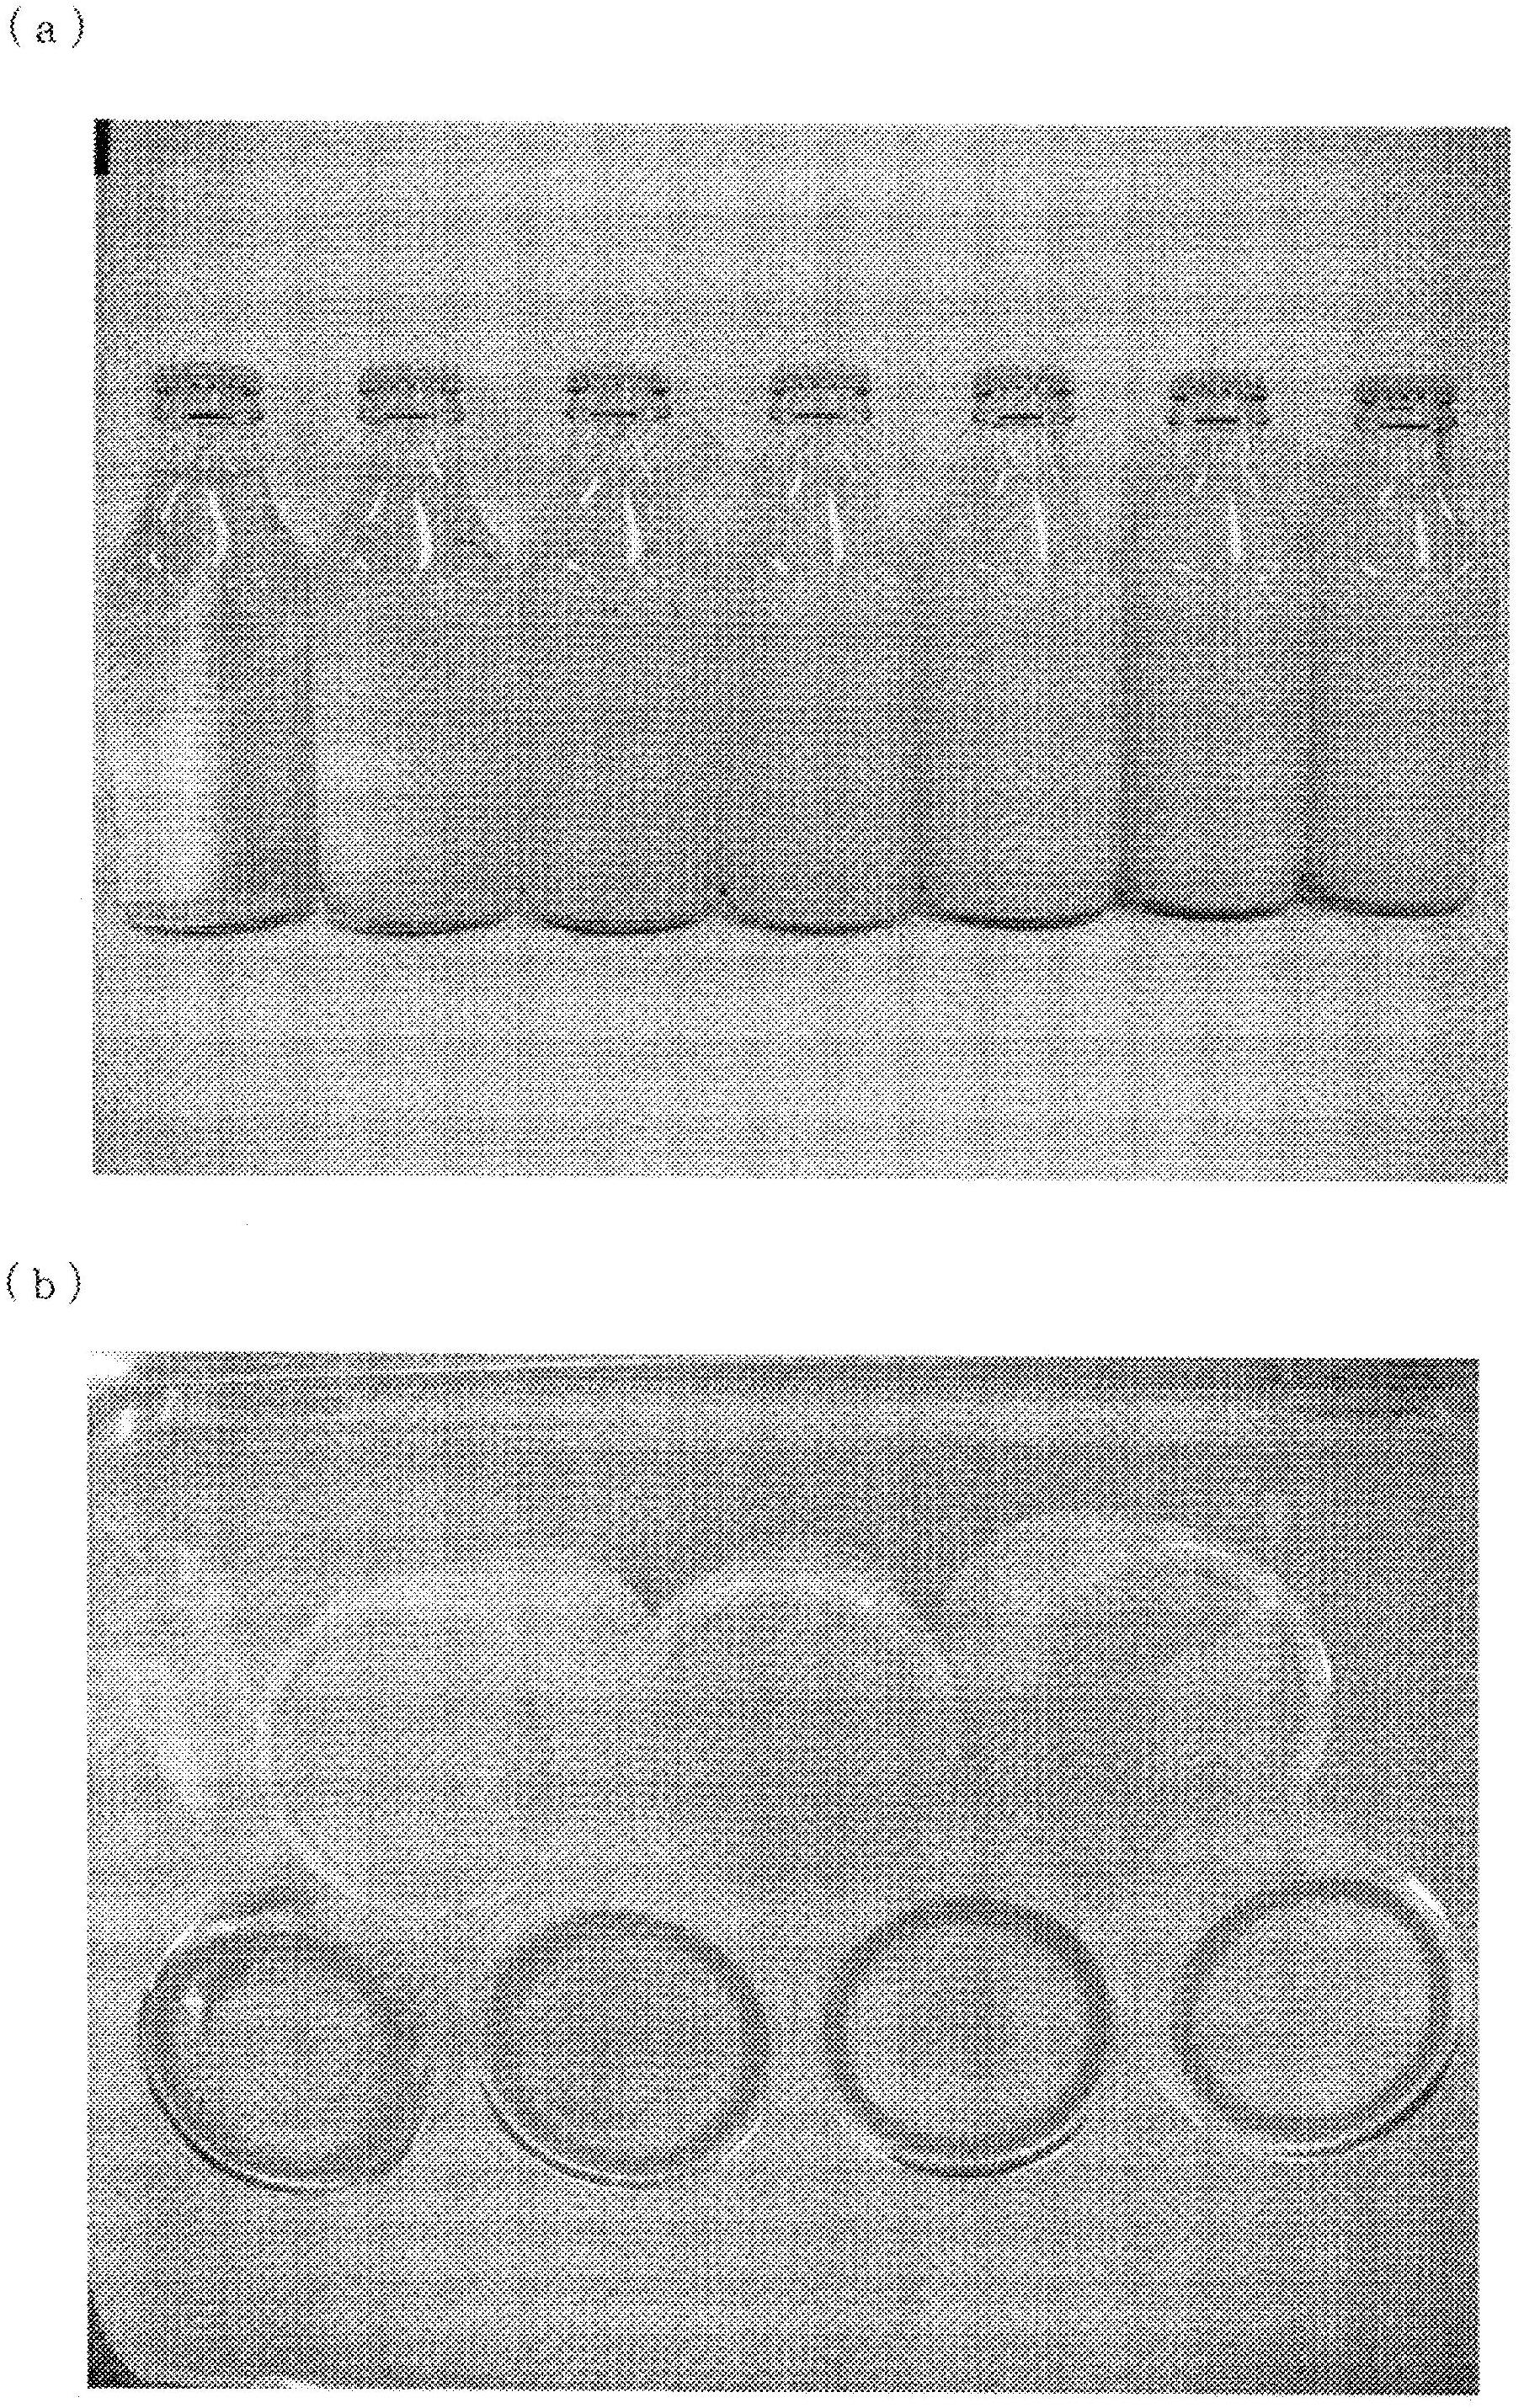 Turmeric pigment composition and method for preparing same